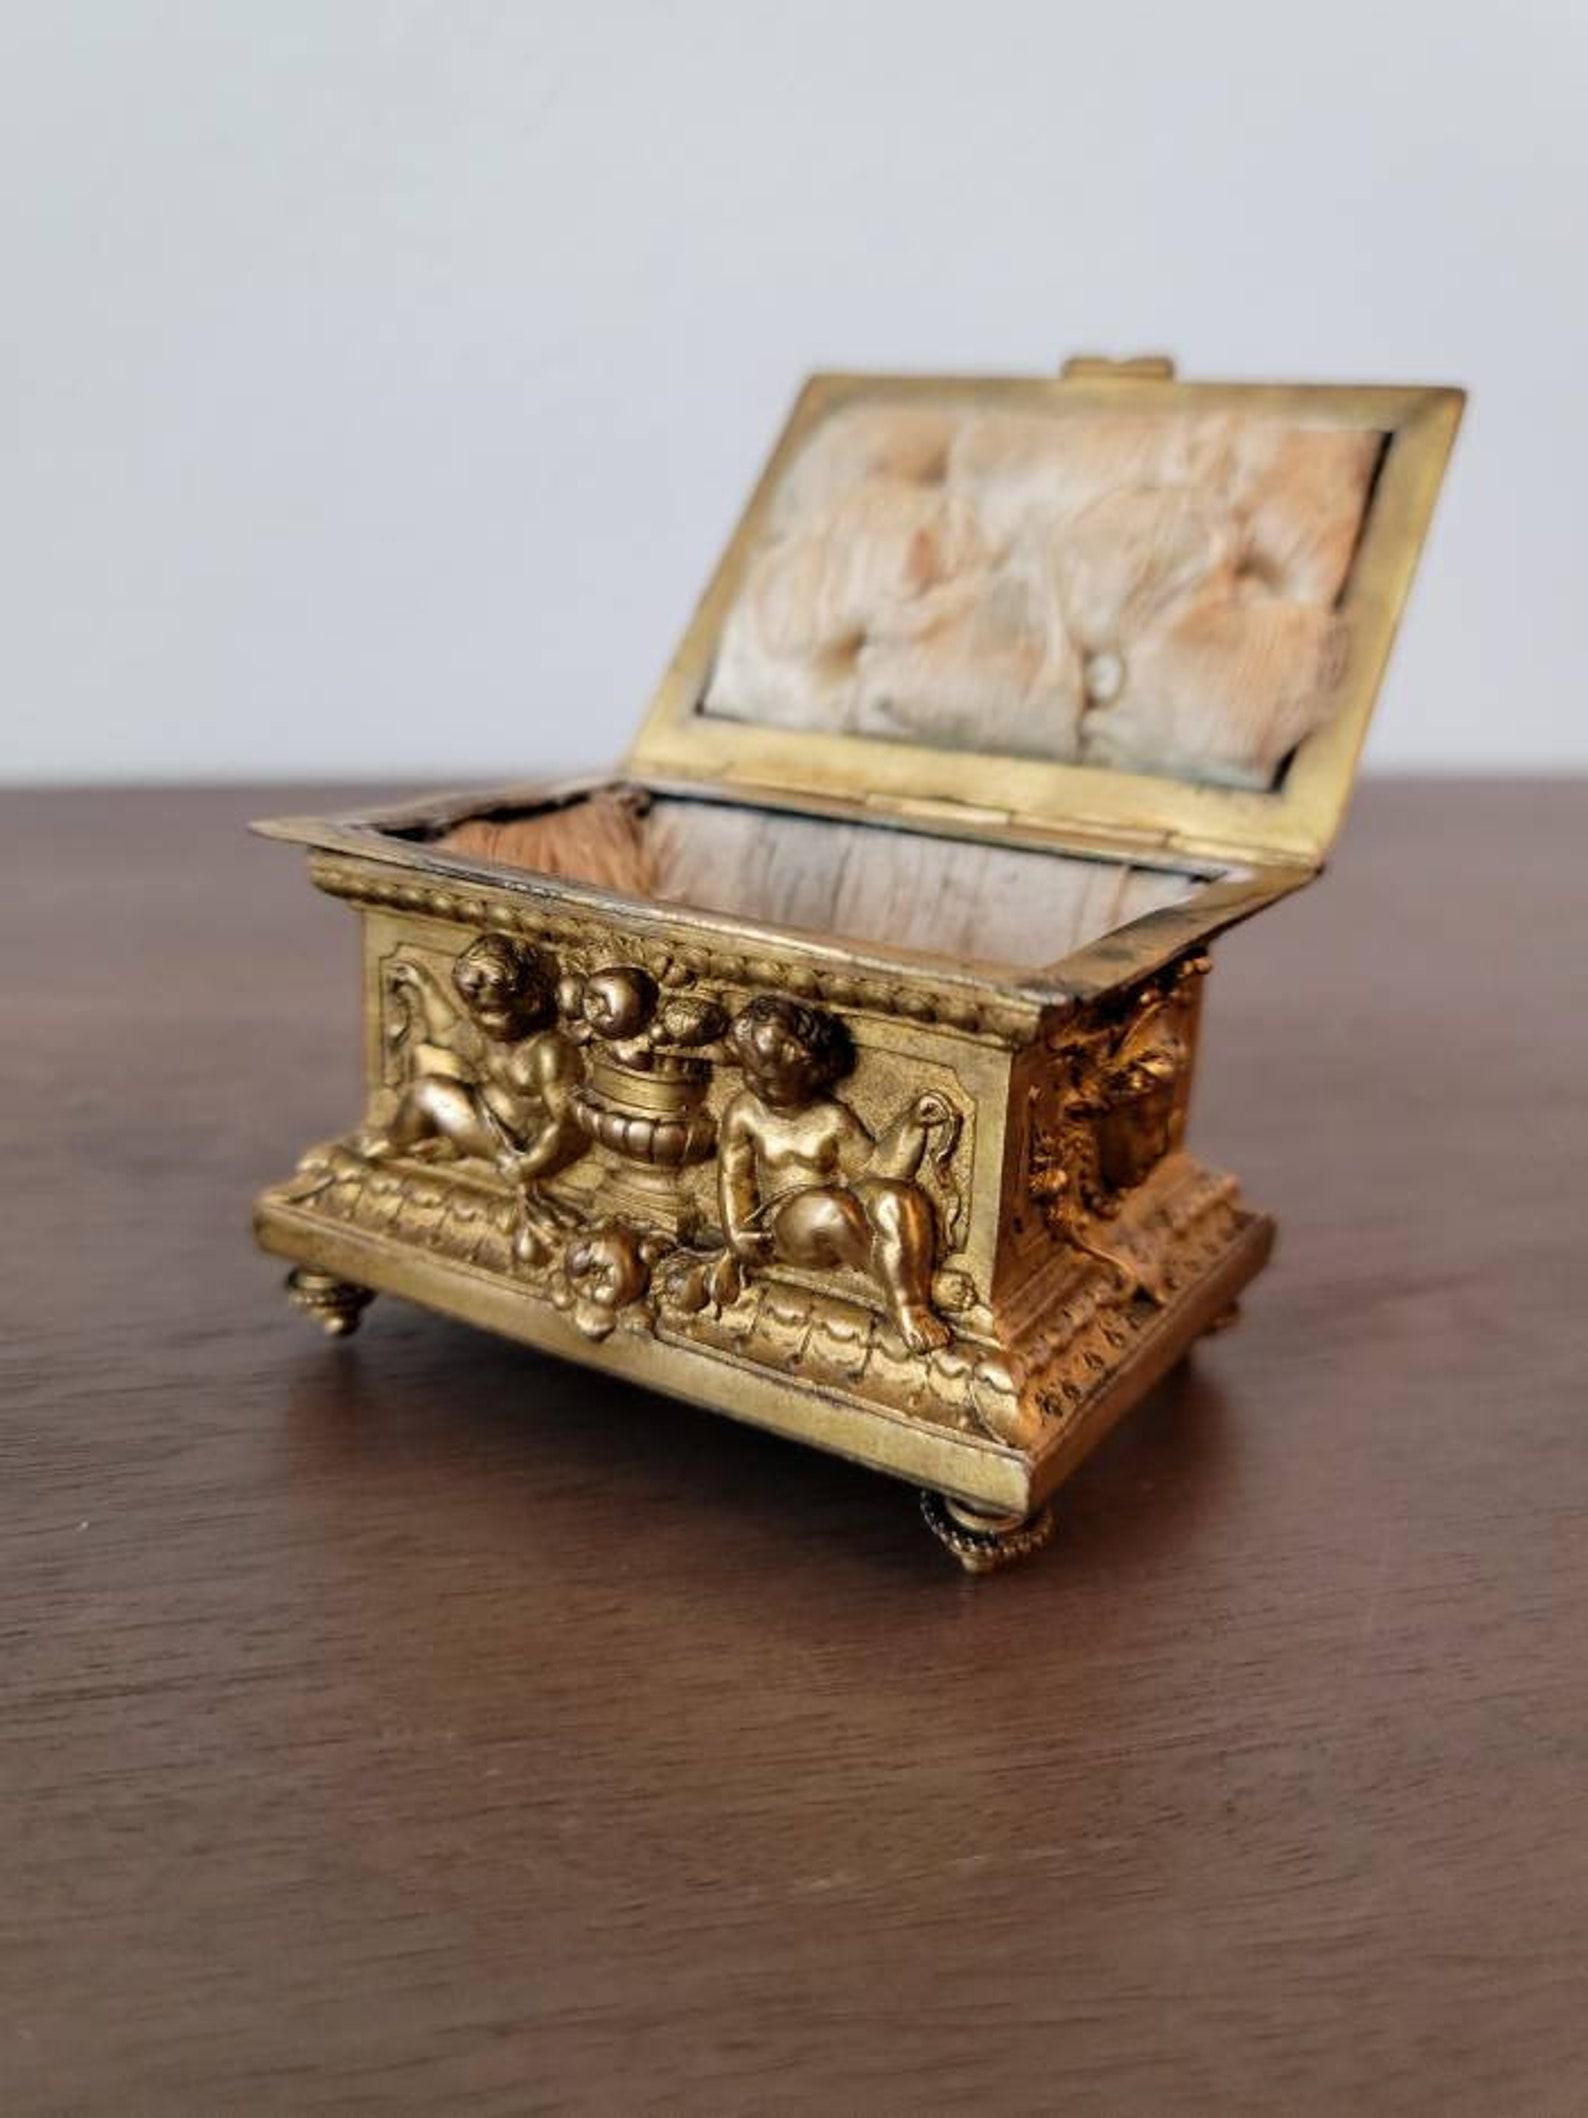 19th Century Petite Antique French Neoclassical Gilt Bronze Jewel Casket For Sale